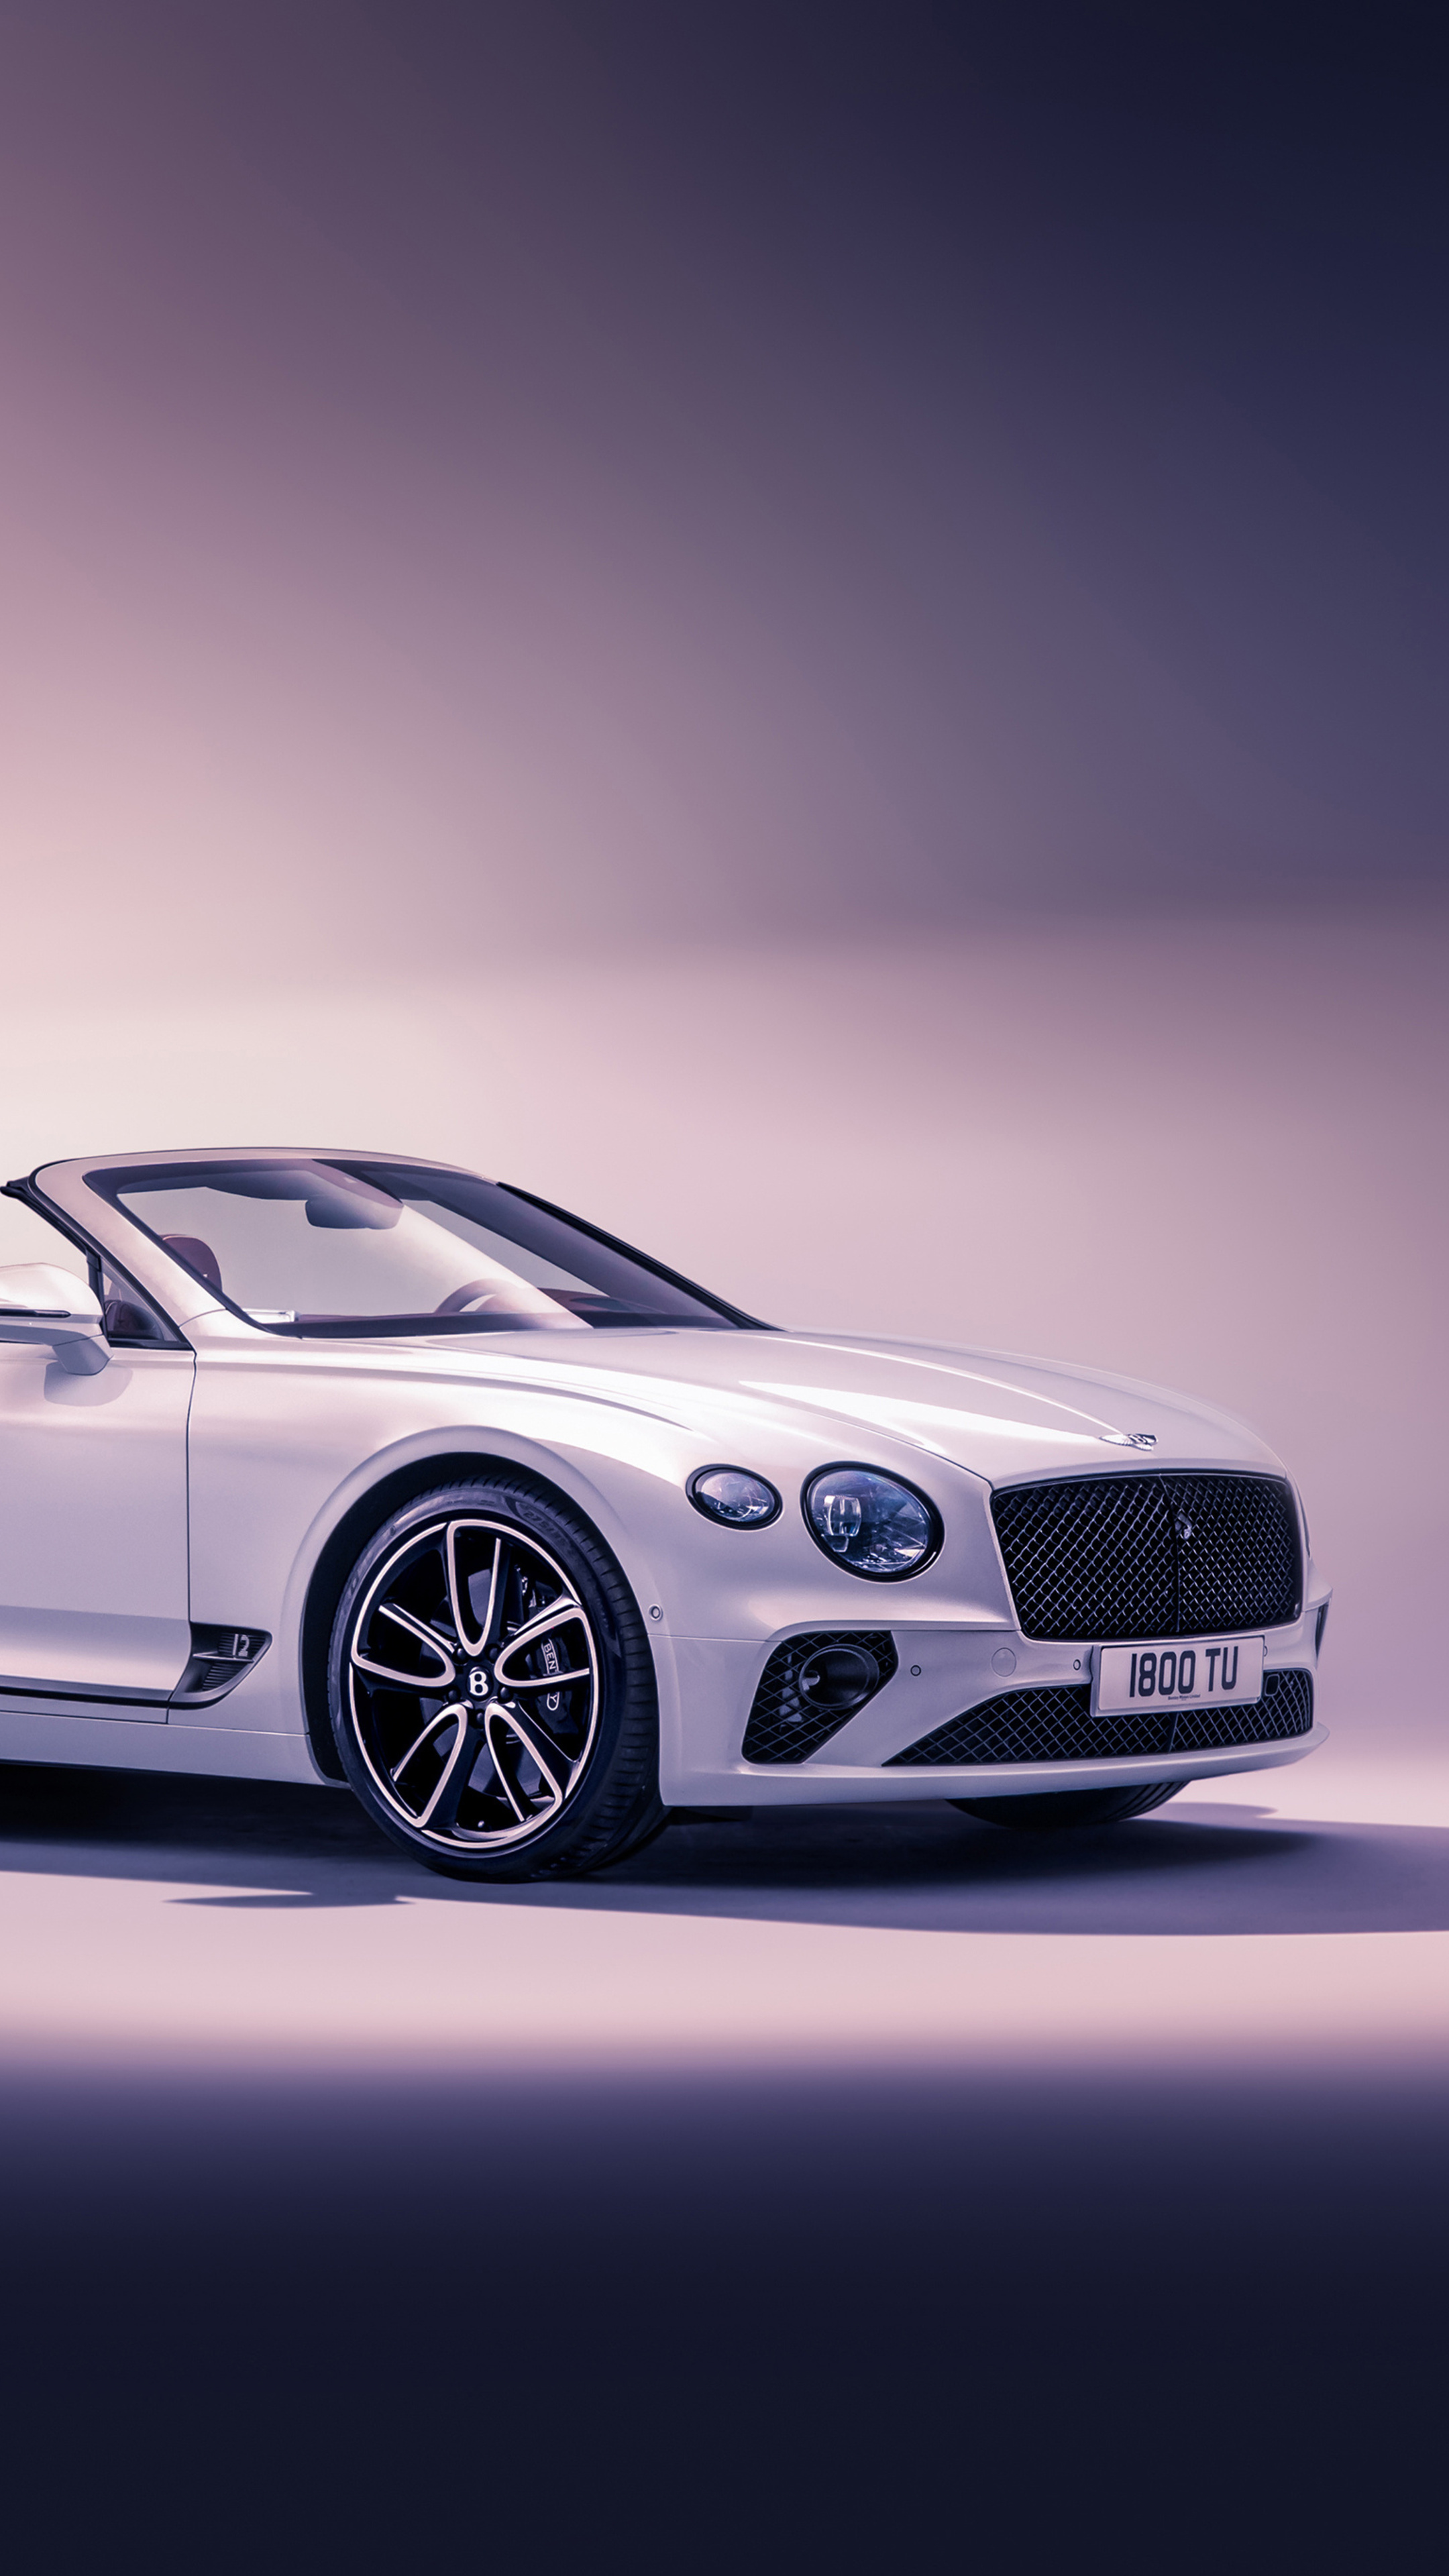 Bentley Continental GTC, Xperia 4K wallpapers, Luxury elegance, High-resolution images, 2160x3840 4K Handy